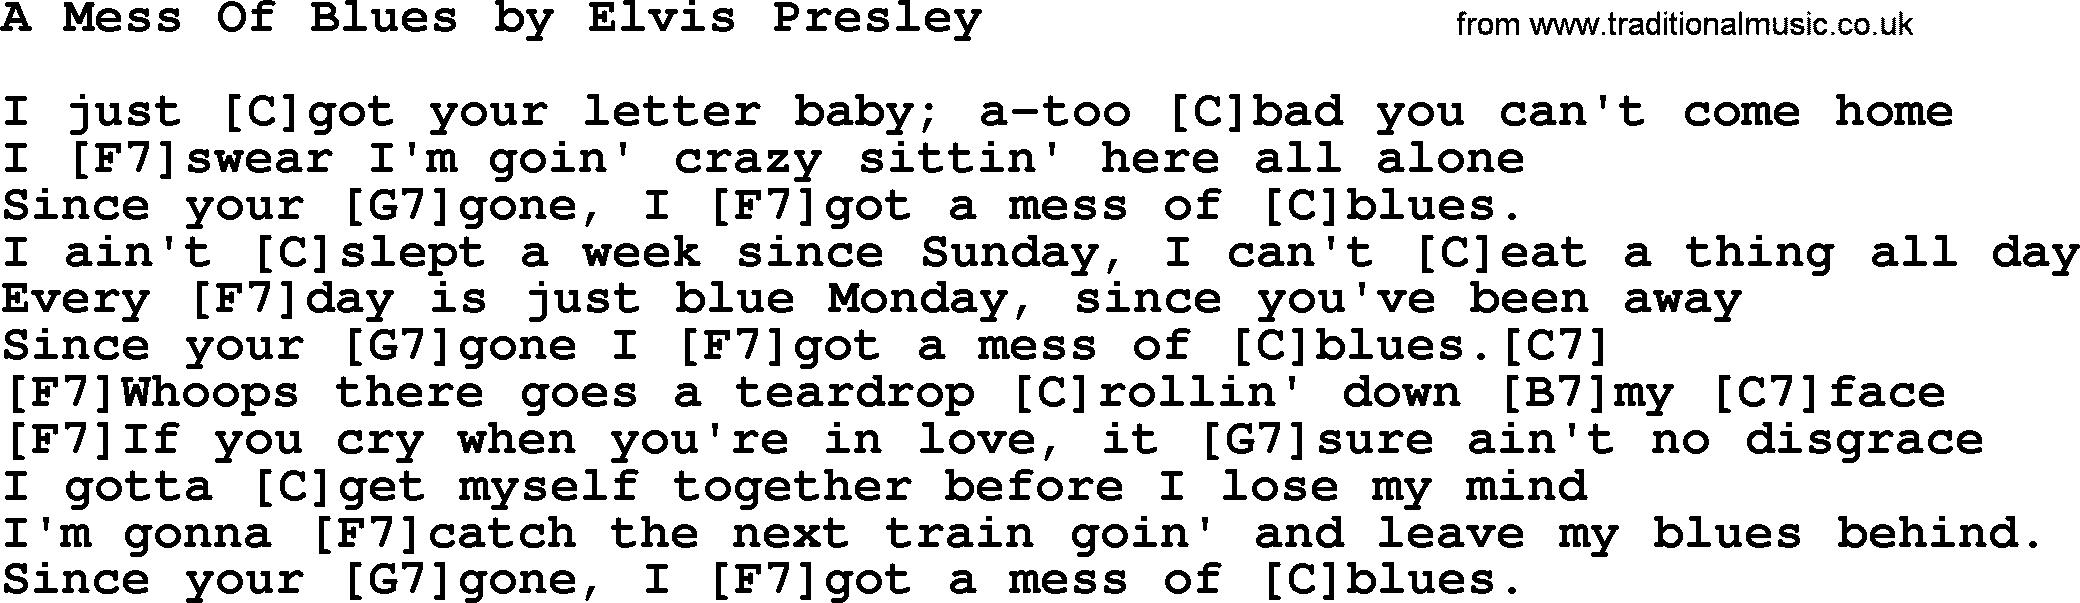 Elvis Presley song: A Mess Of Blues, lyrics and chords